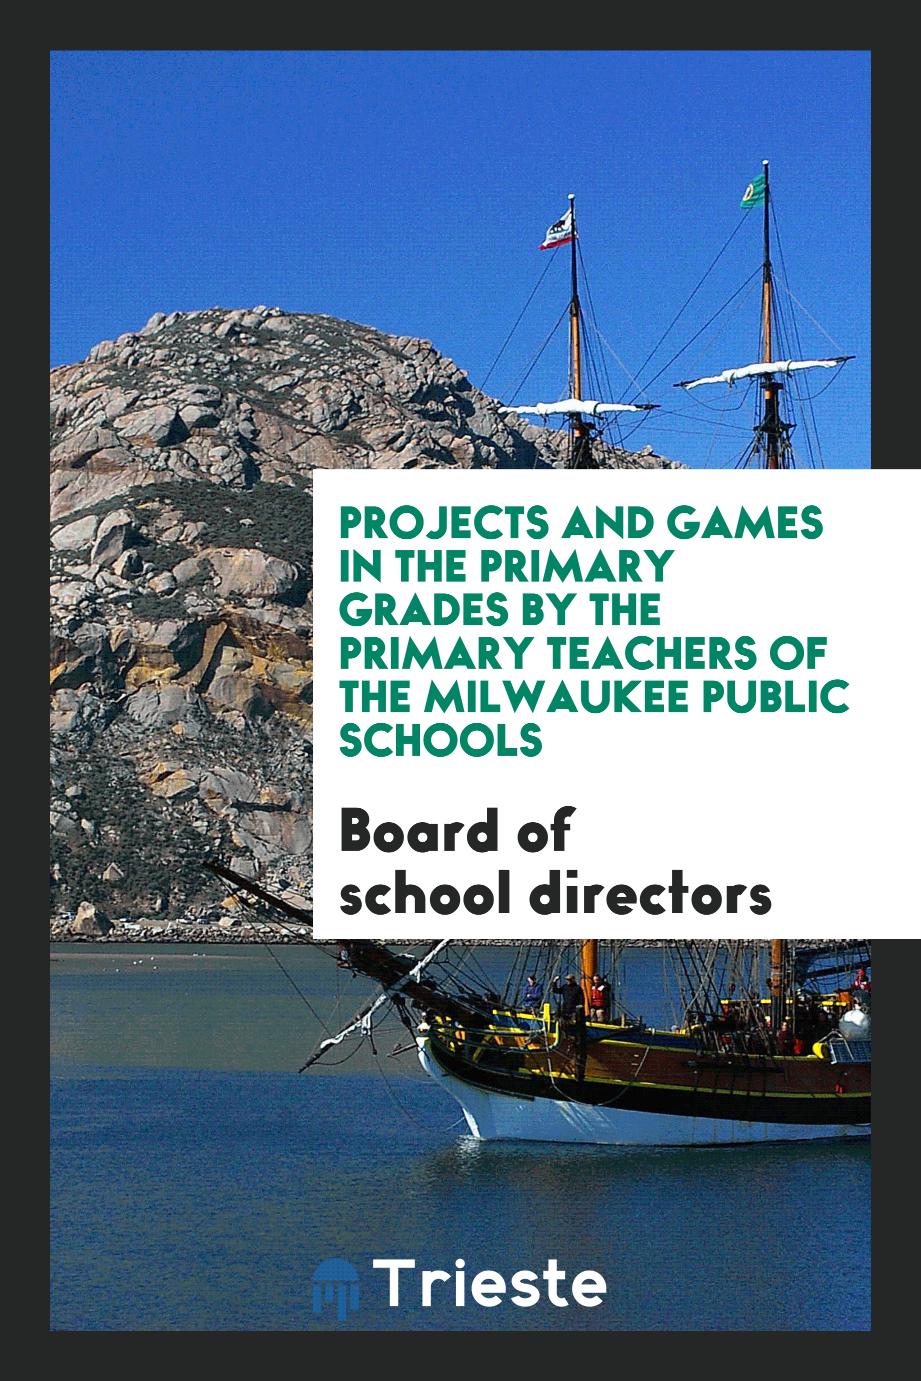 Projects and Games in the Primary Grades by the Primary Teachers of the Milwaukee Public Schools